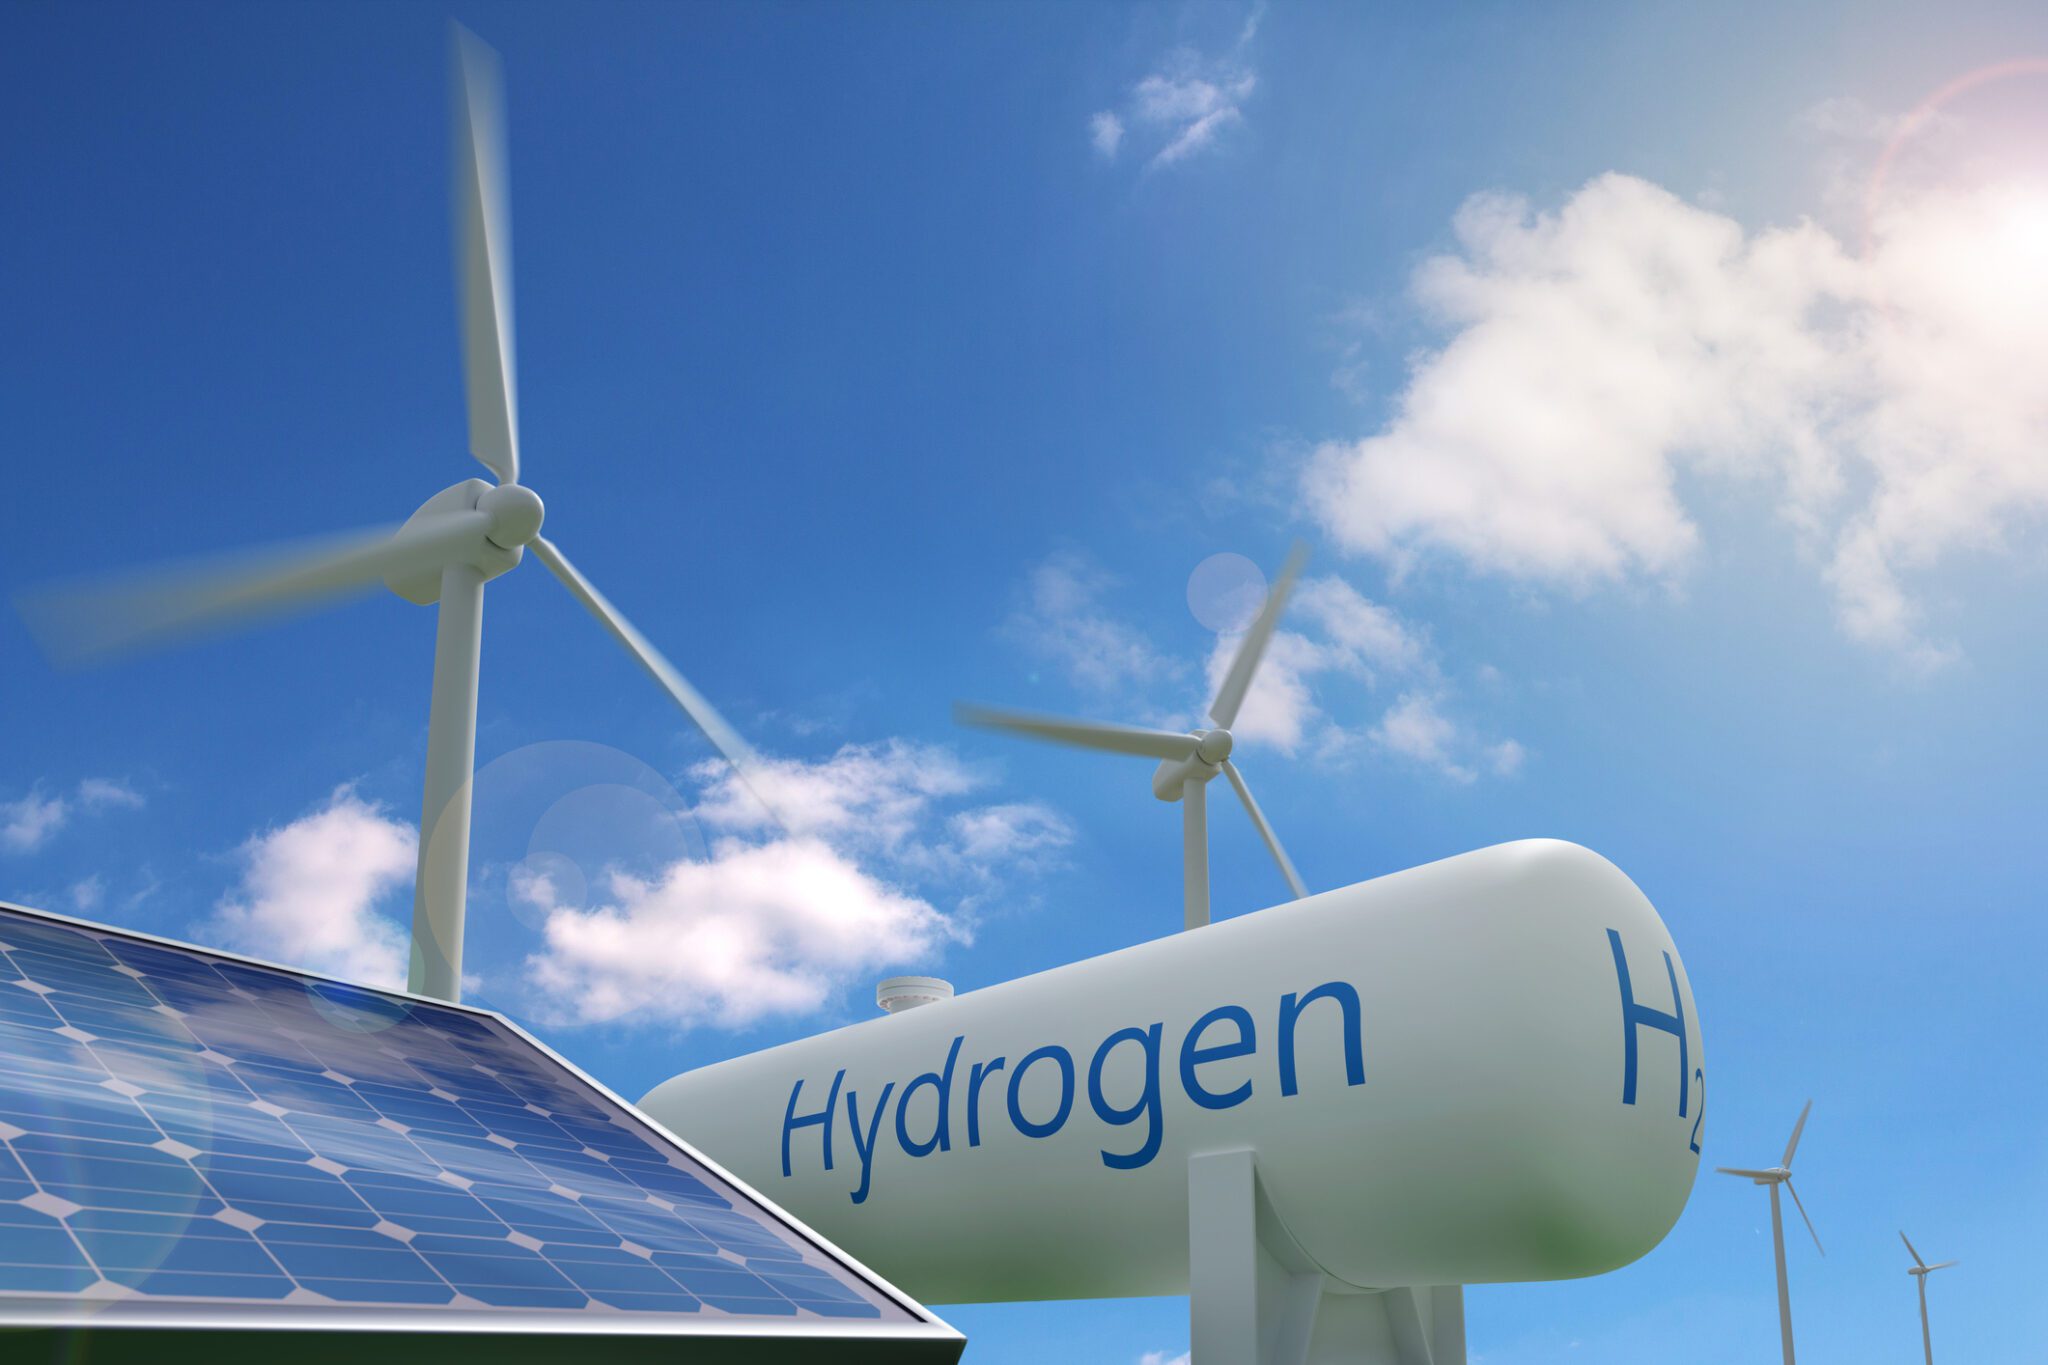 Hydrogen tank, solar panel and windmills on blue sky background. Sustainable and ecological energy concept. 3d illustration.